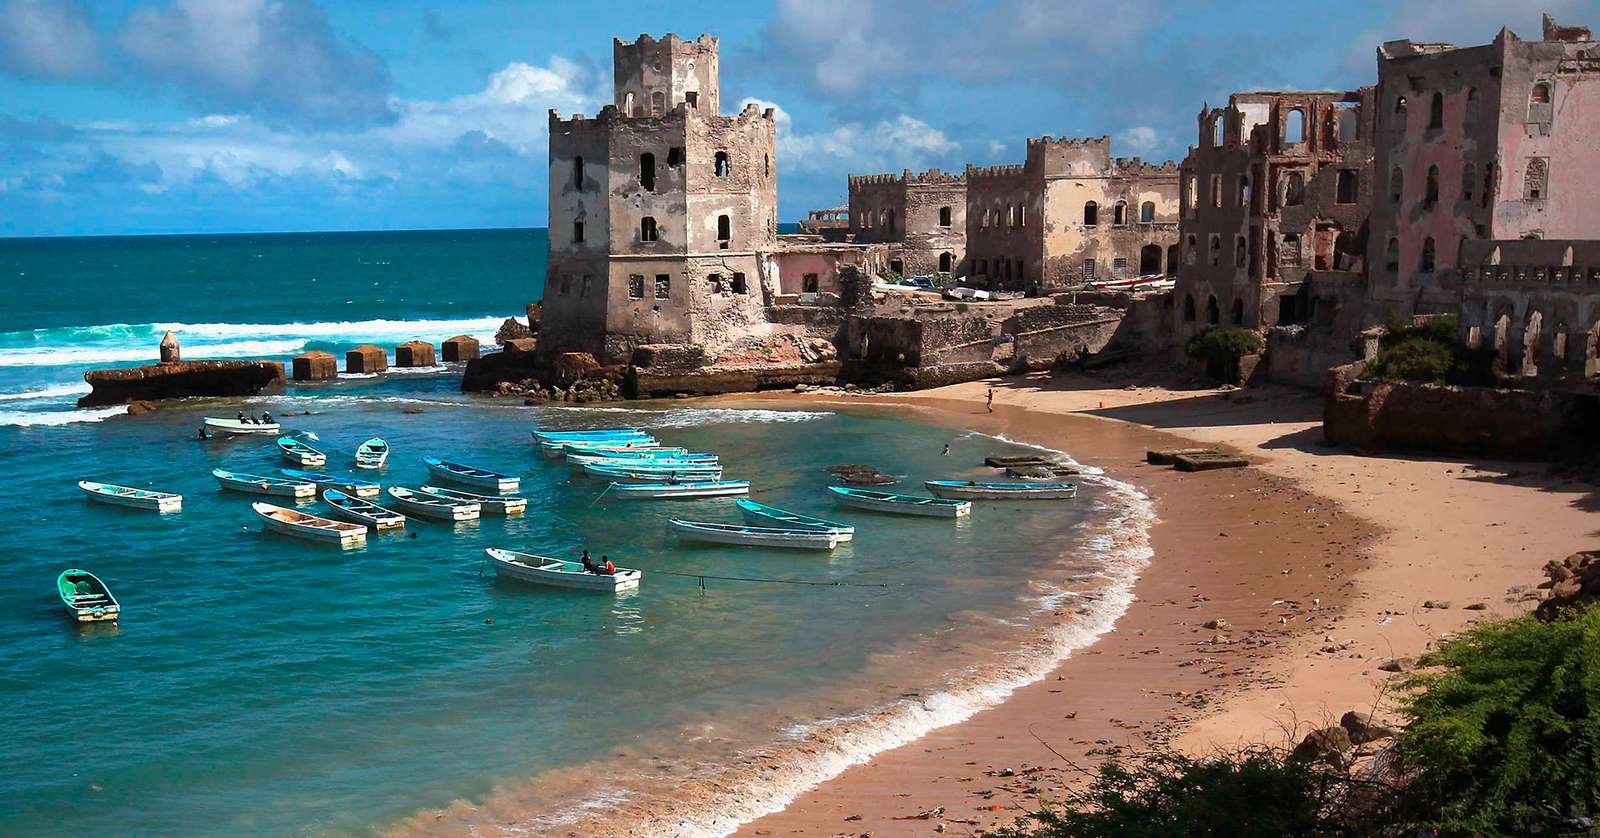 Somalia geography lesson puzzle online from photo